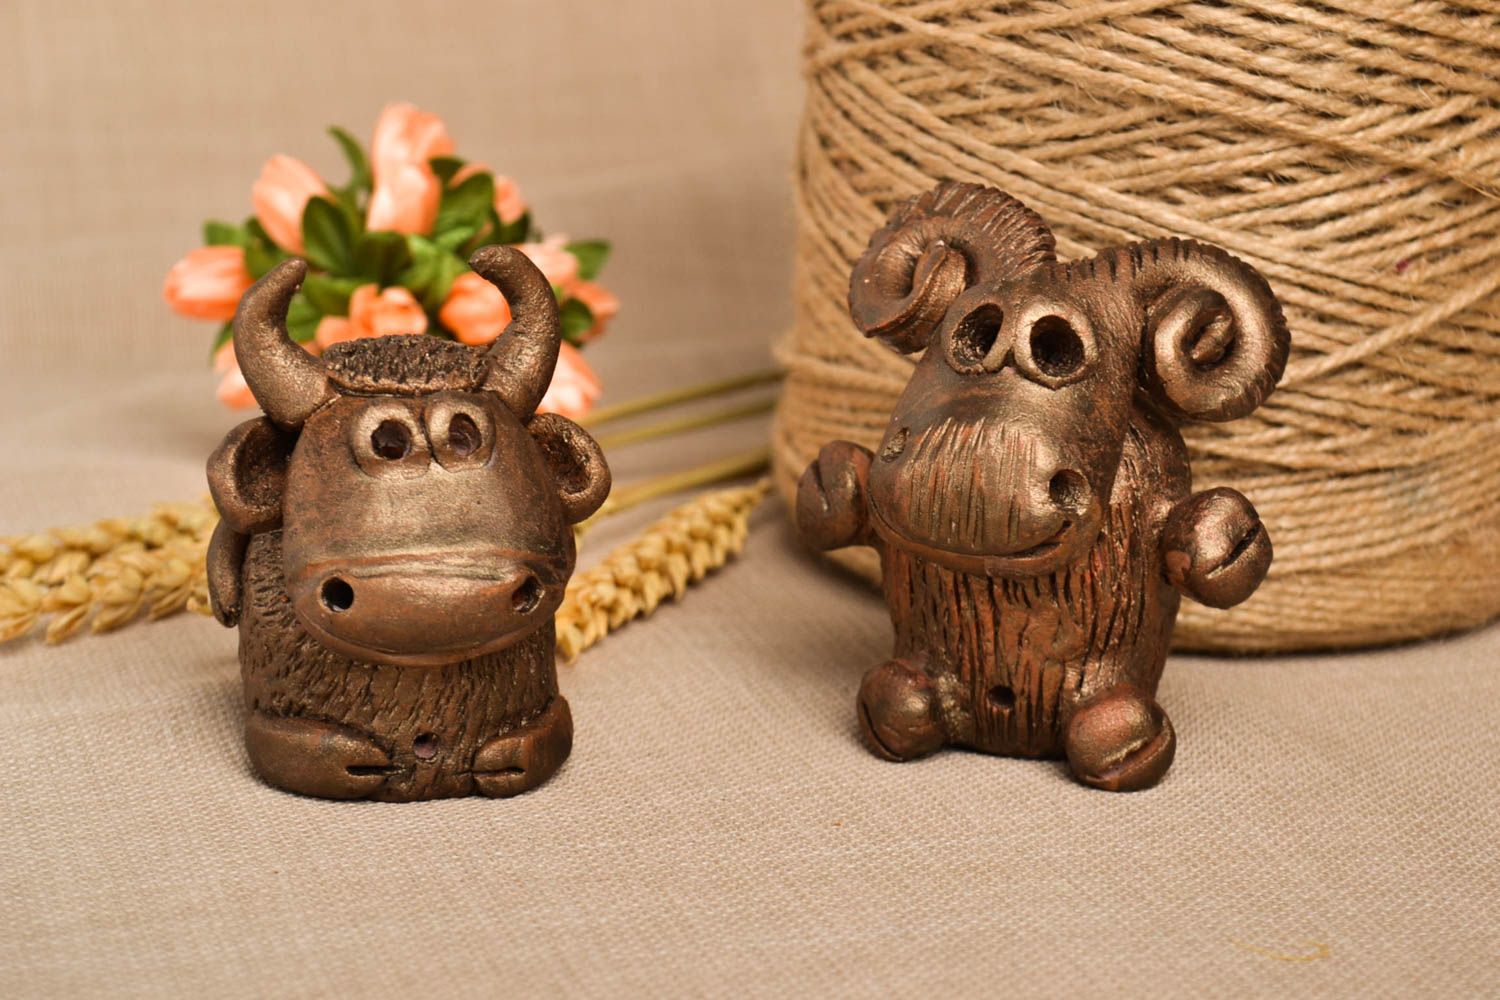 Handmade figurine unusual souvenirs set of 2 items decorative use only photo 1